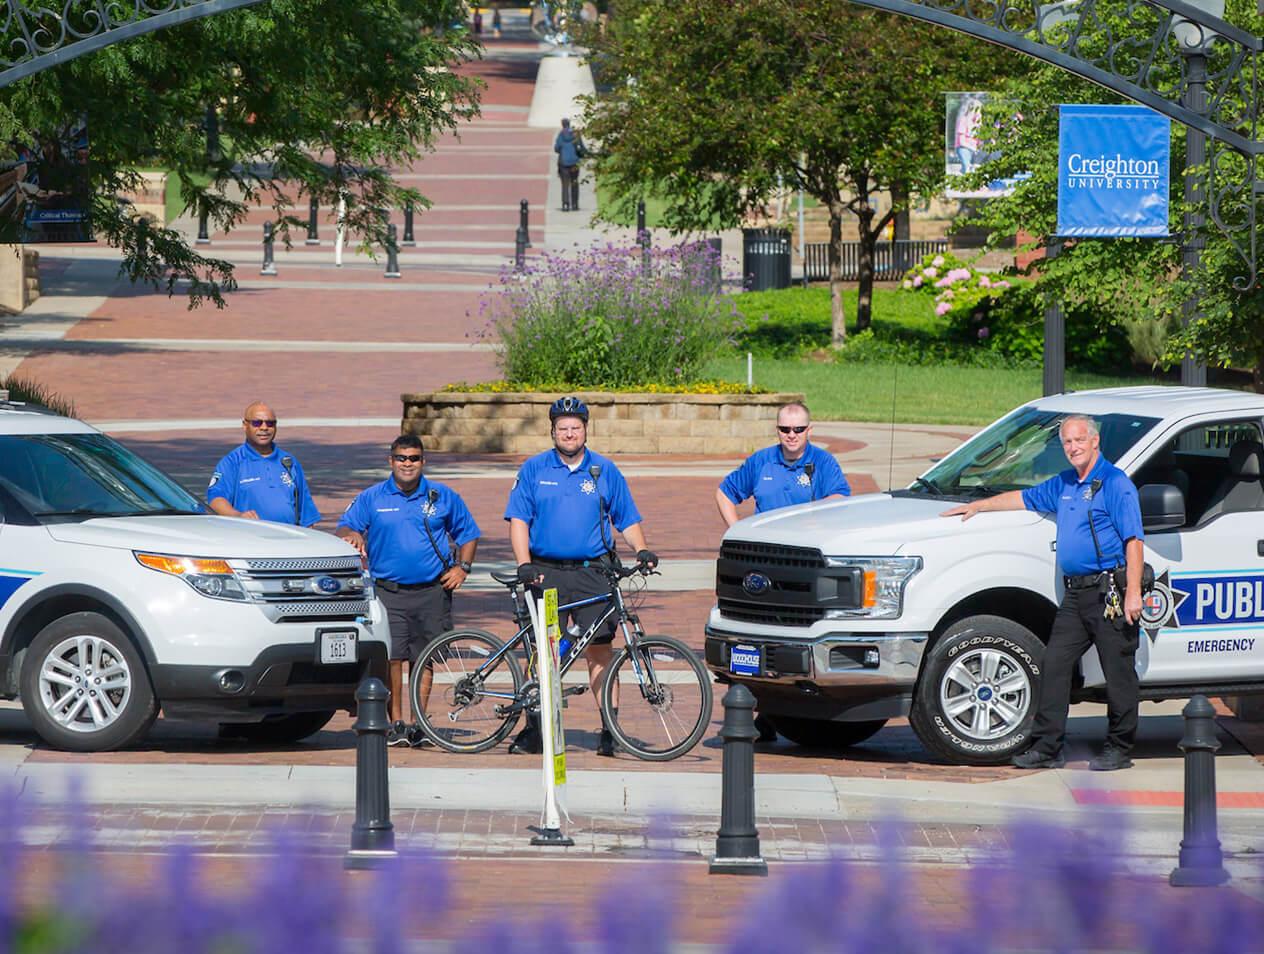 The Creighton University public safety officers